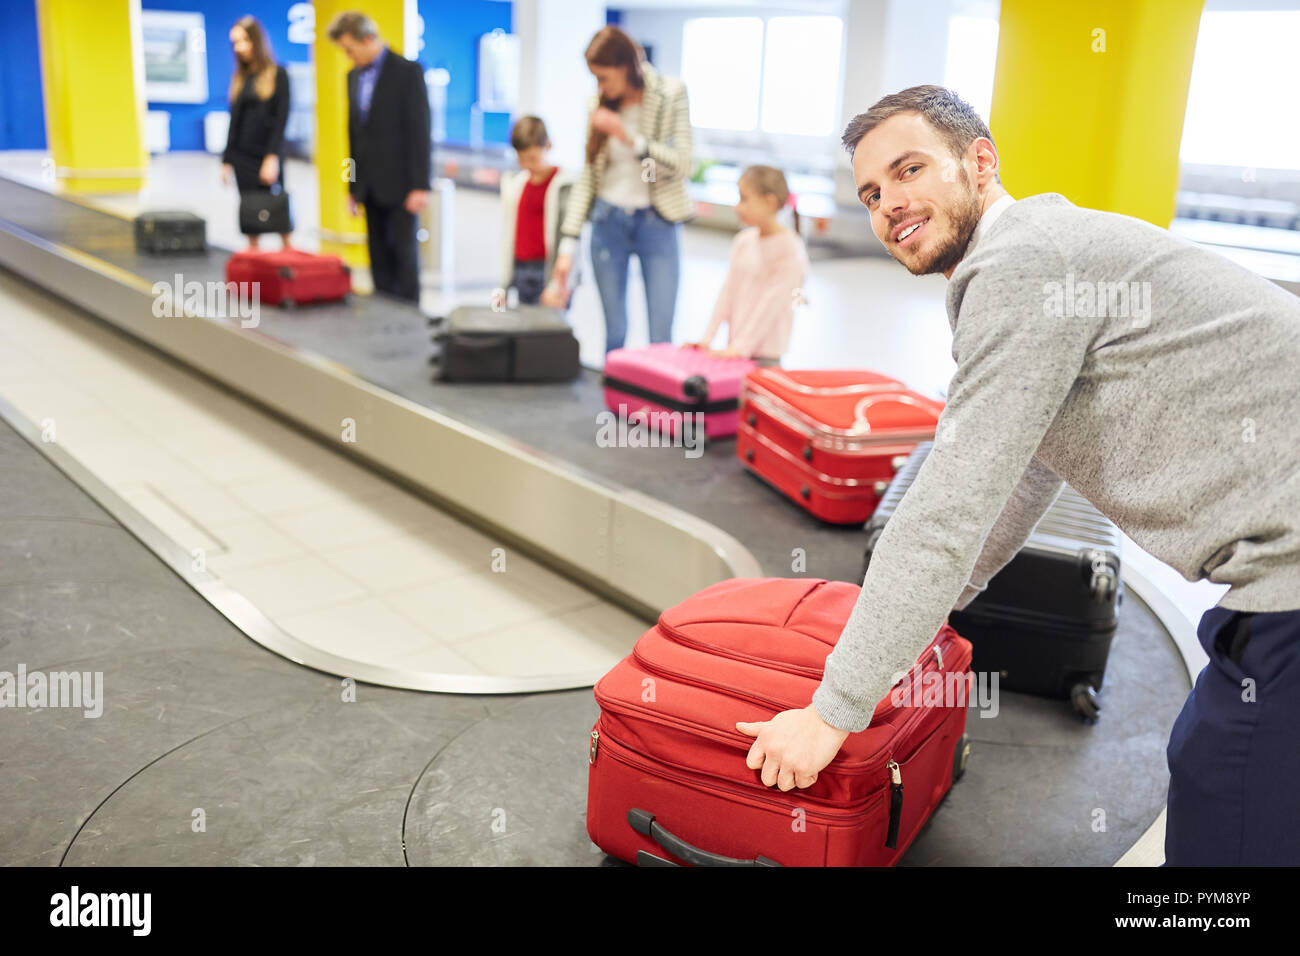 Family and other travelers on the luggage belt pick up their bags after the trip arrives Stock Photo